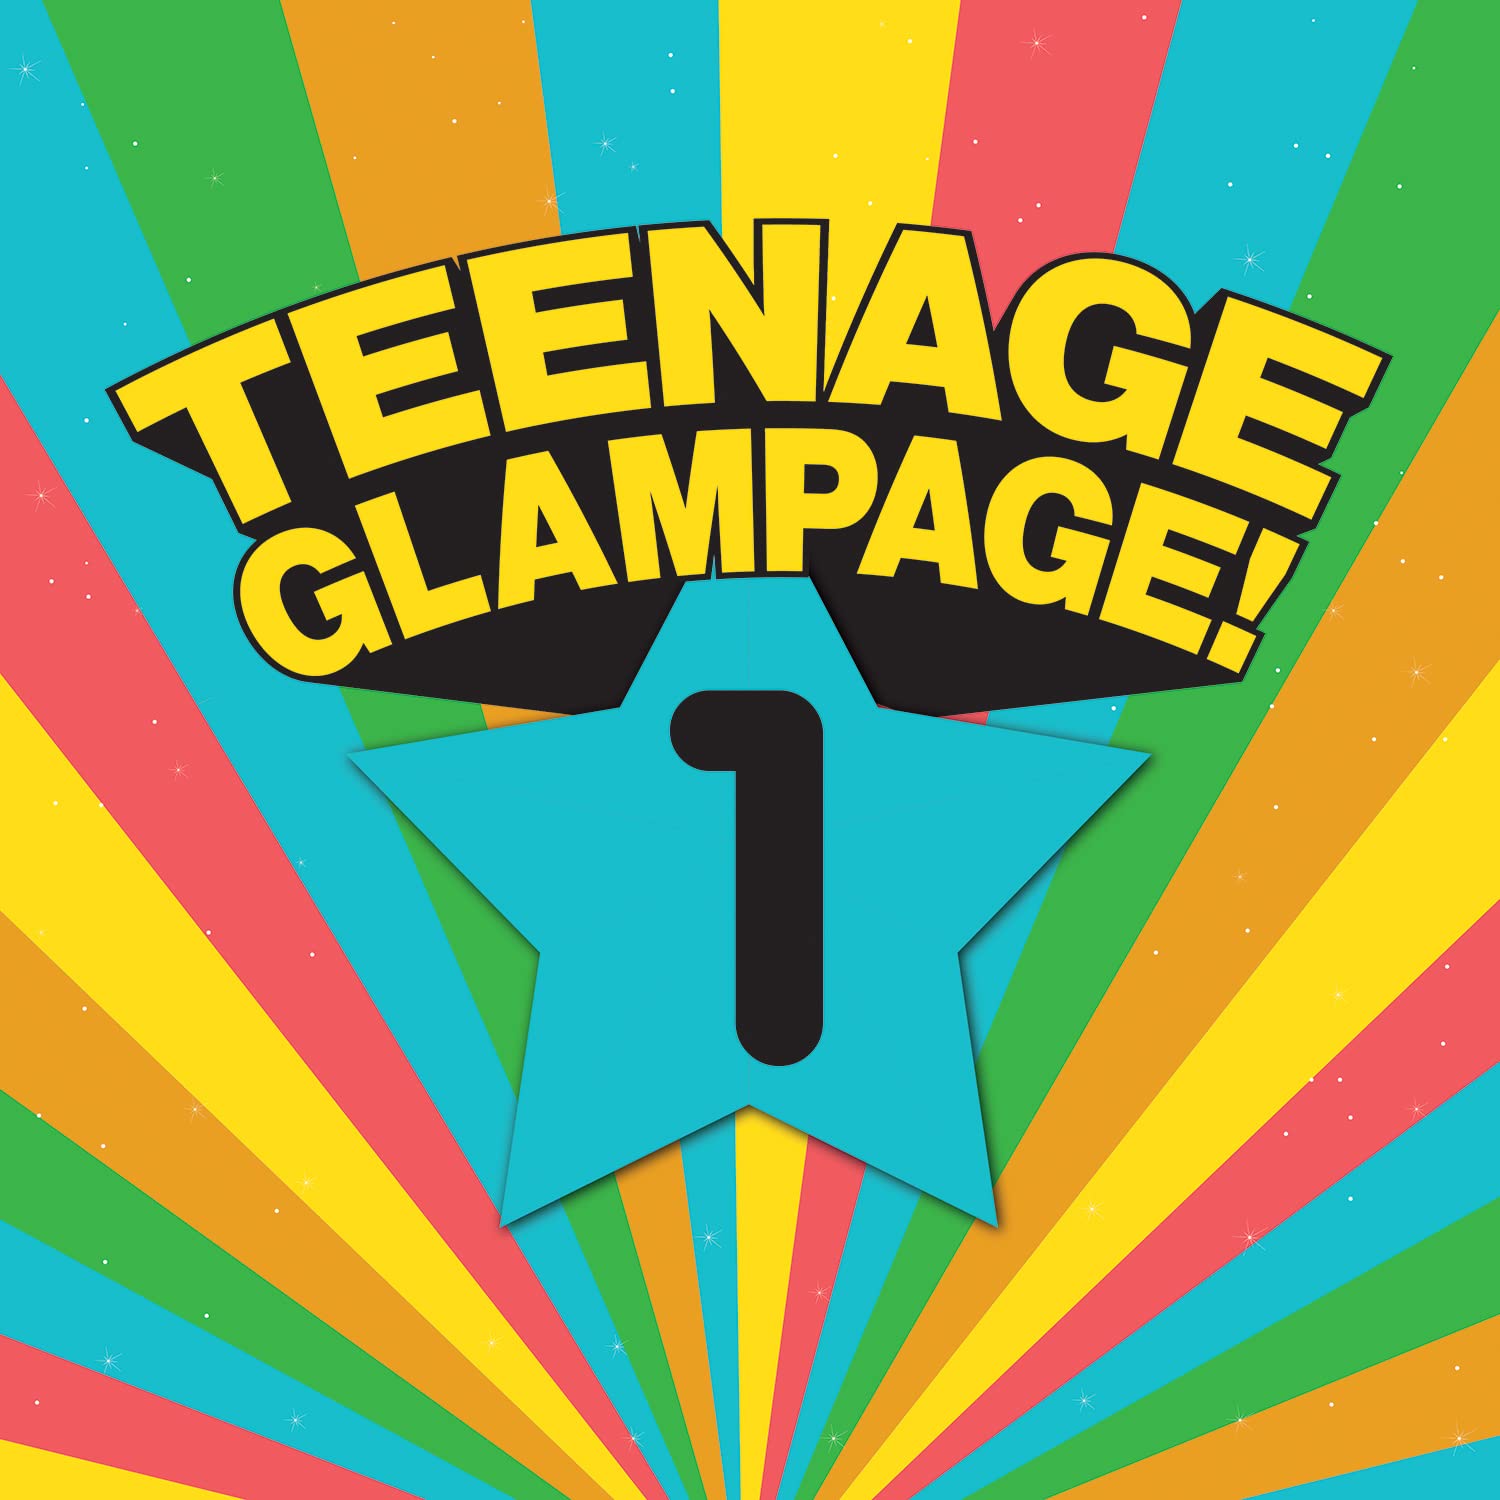 Various Artists - Can the Glam! 2 - Teenage Glampage! 80 Glambusters (2022) MP3 320kbps Download